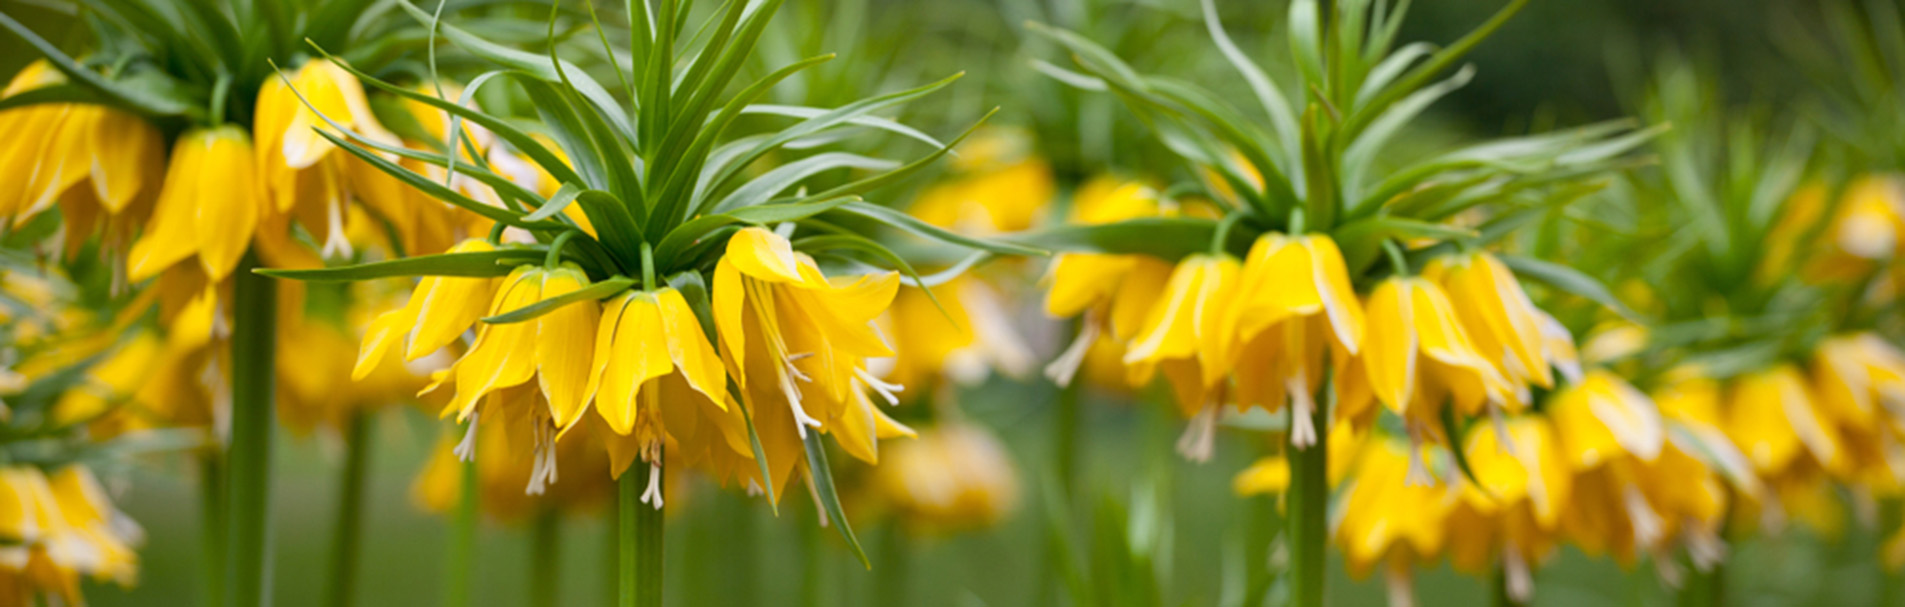 Bright yellow bell-shaped flowers of Fritillaria imperialis 'Maxima Lutea'.